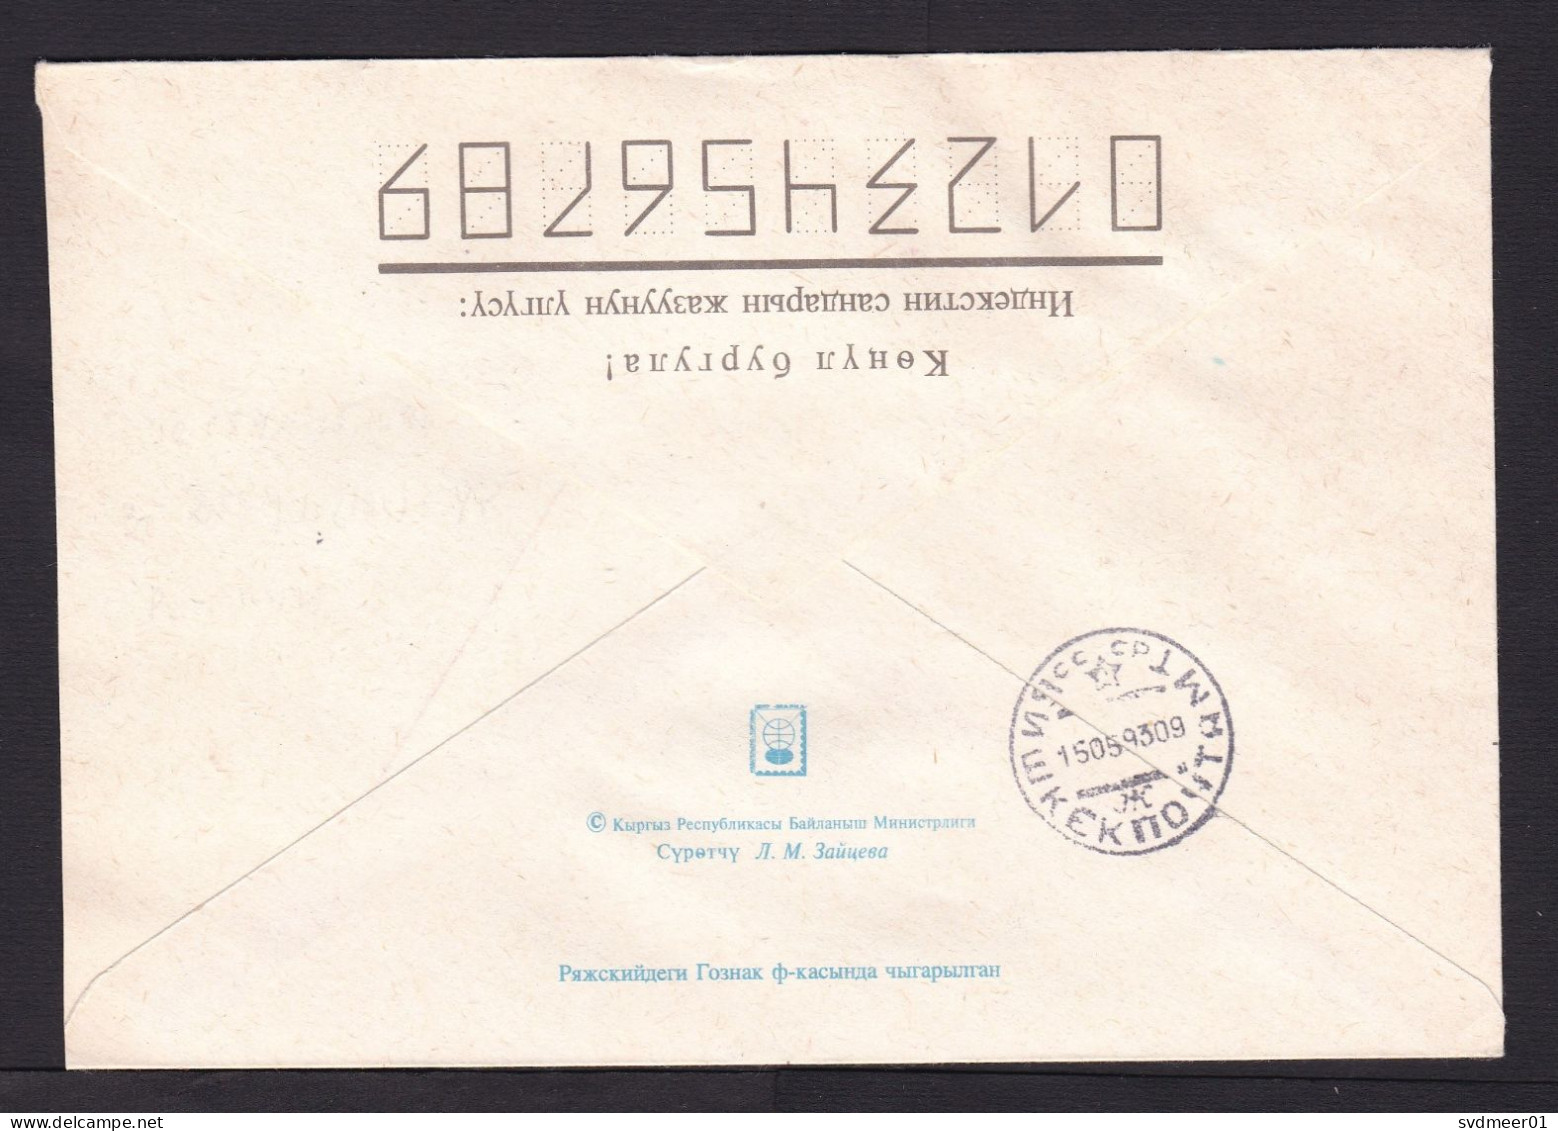 Kyrgyzstan: Registered Cover, 1993, 2 Stamps, Pheasant Bird, River, Building, Heritage (traces Of Use) - Kyrgyzstan